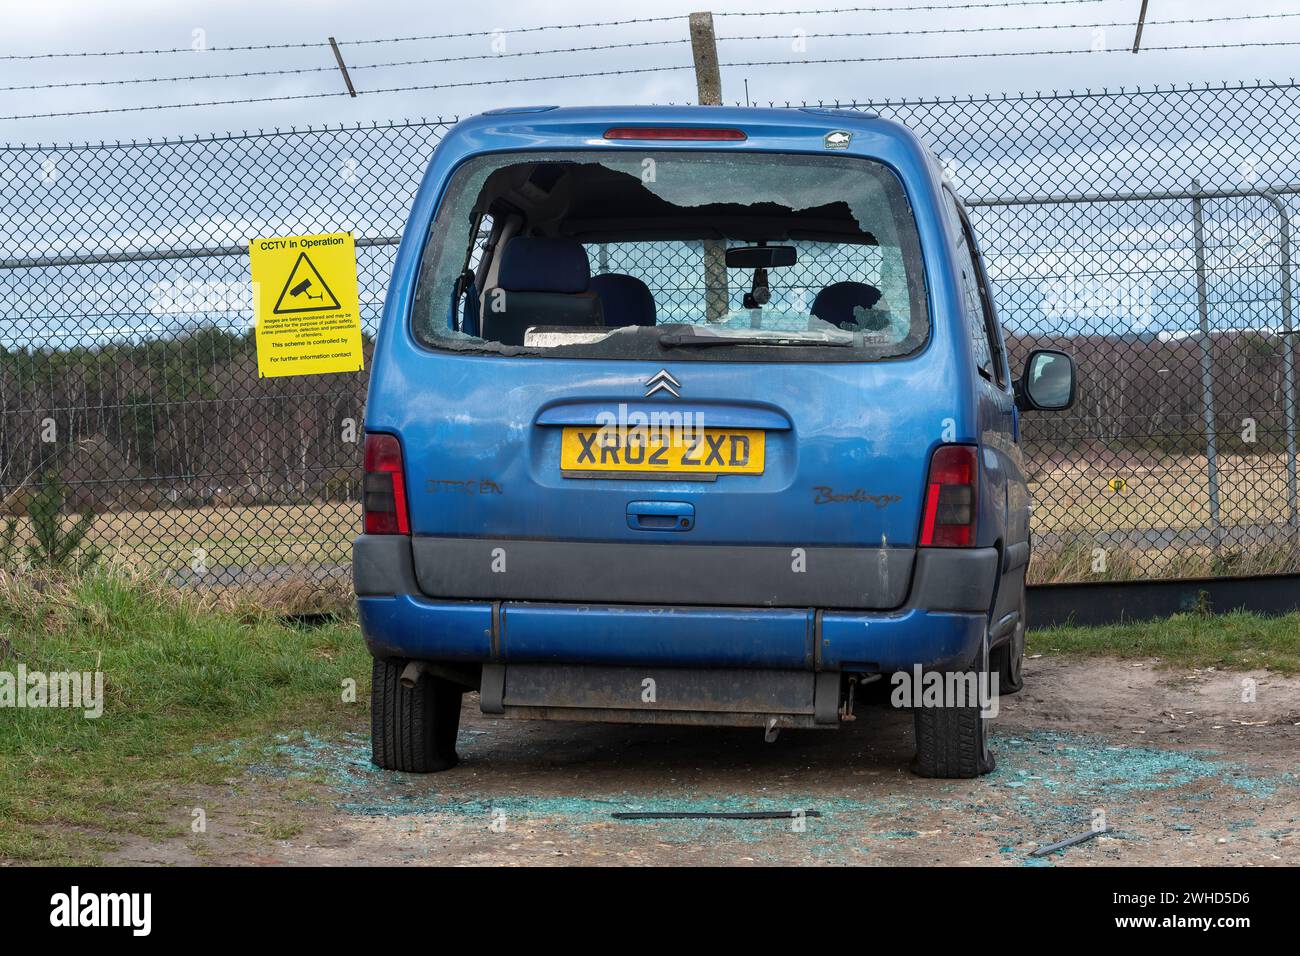 Car crime concept: a car with a smashed rear windscreen despite being parked next to a sign about CCTV in Operation cameras Stock Photo